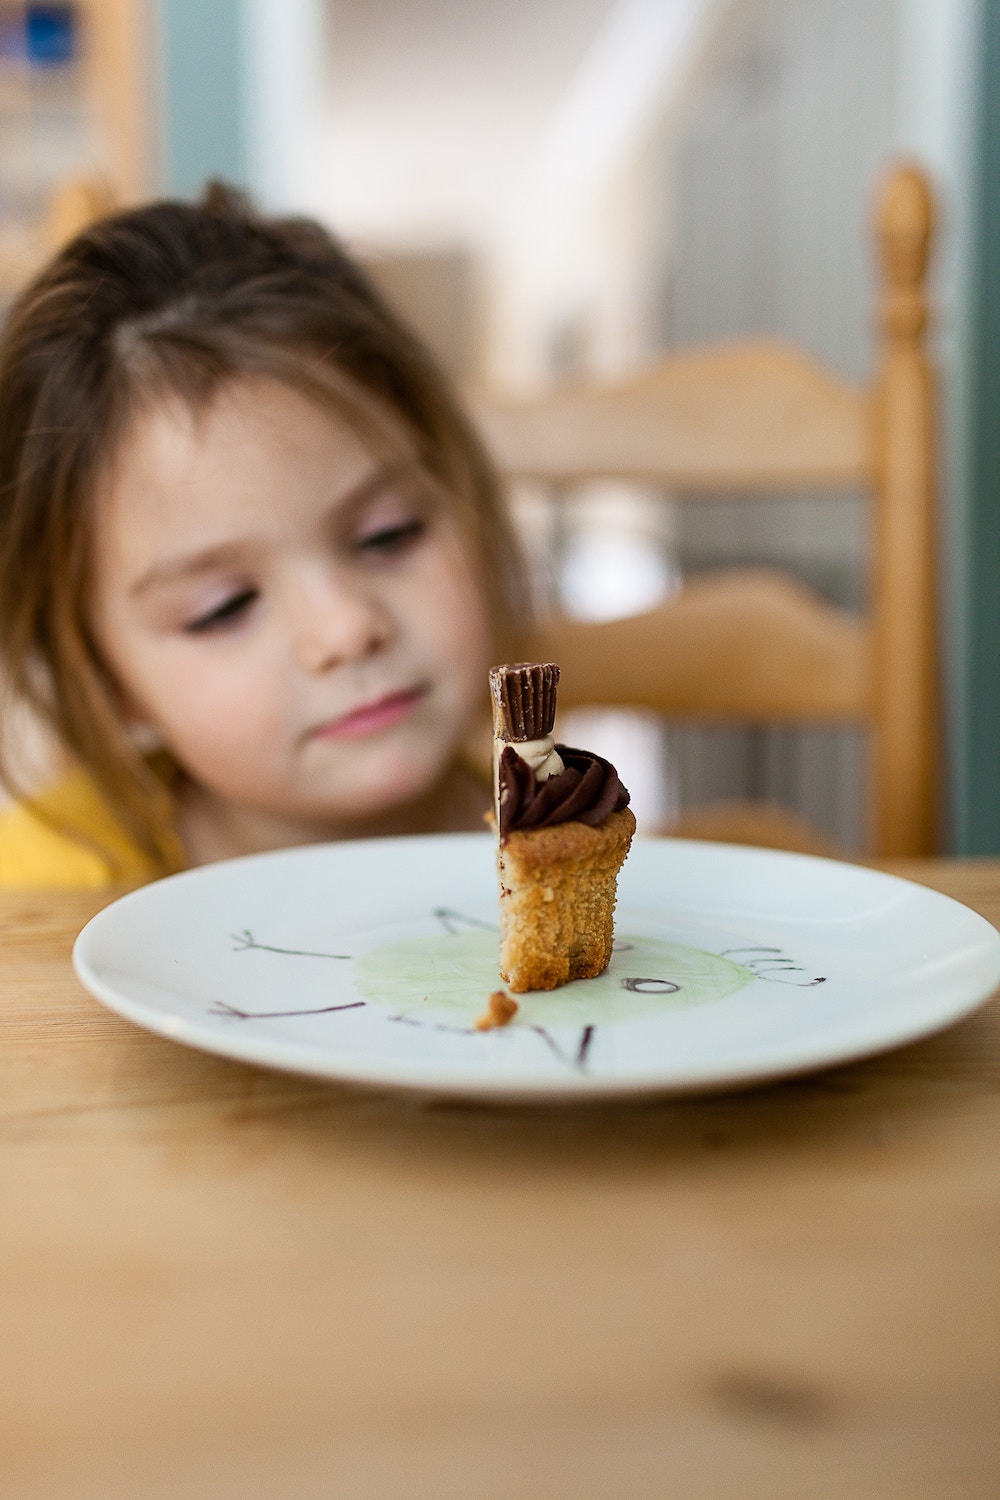 child looking at cake